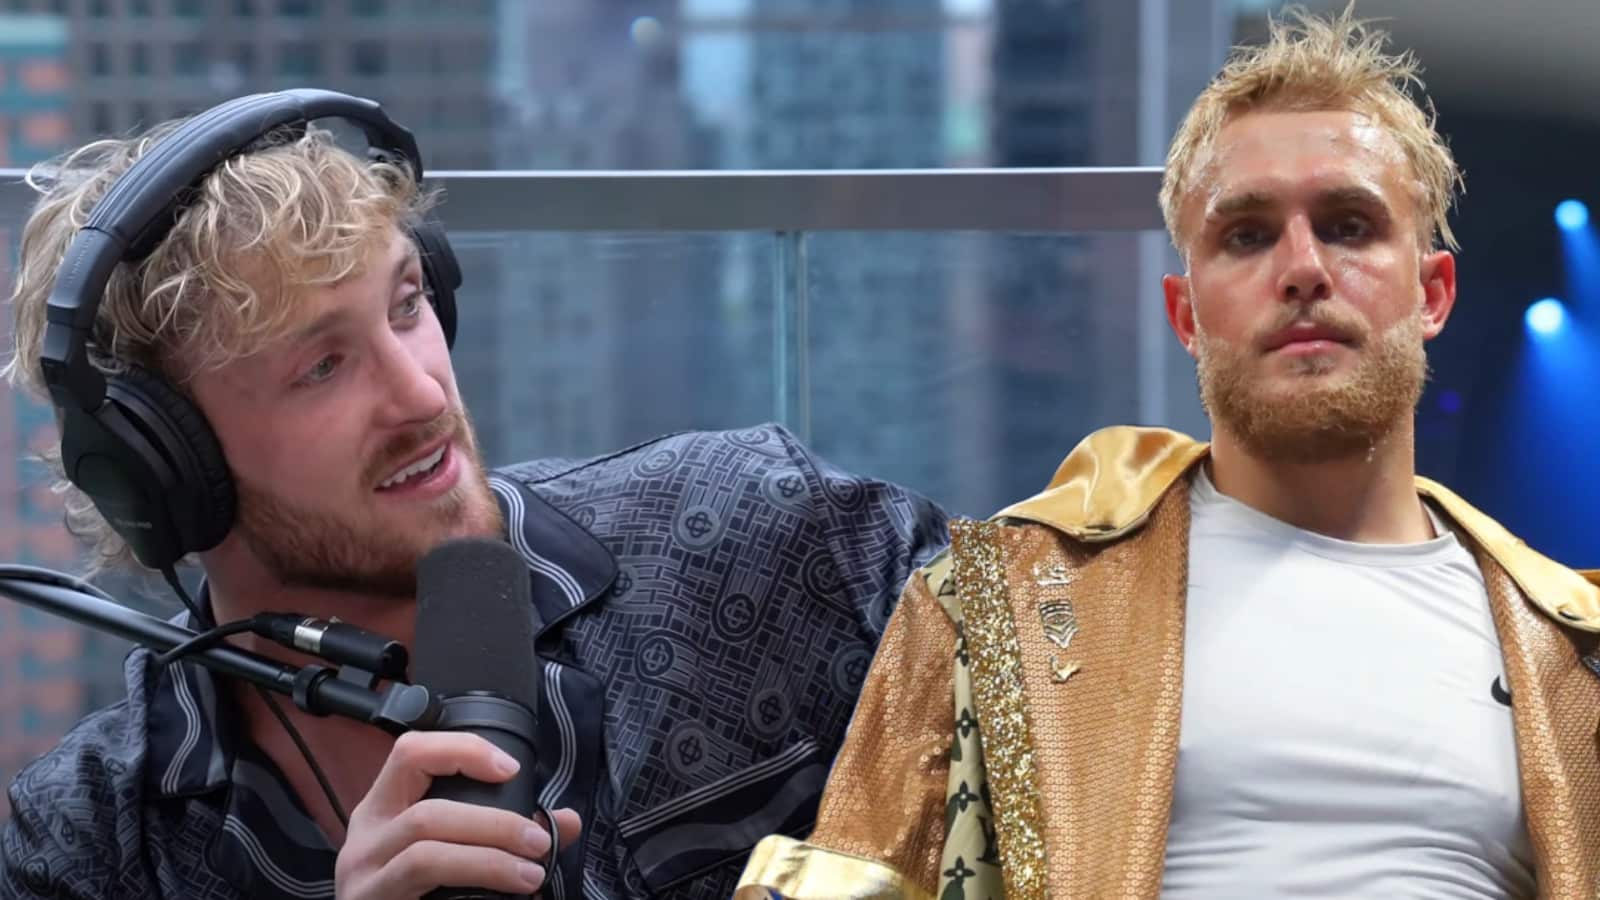 Logan Paul says brother Jake Paul is 'poor' after cryptocurrency